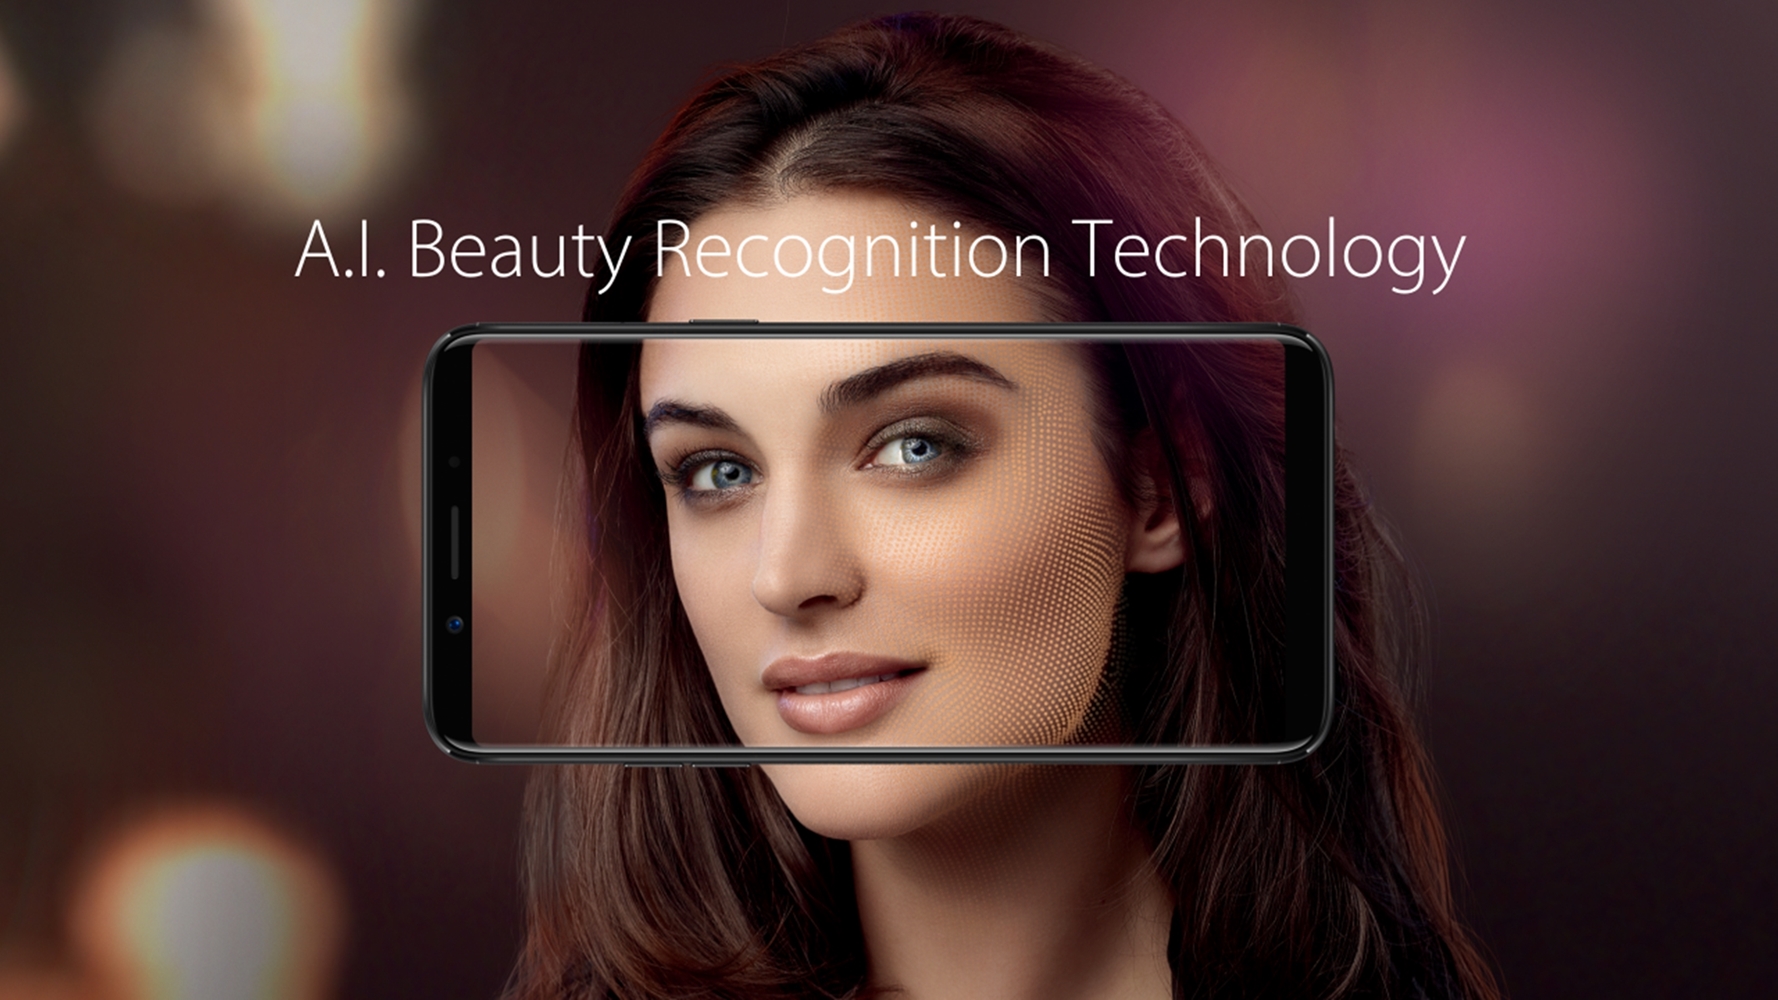 4. OPPO F5 A.I. Beauty Recognition Techology